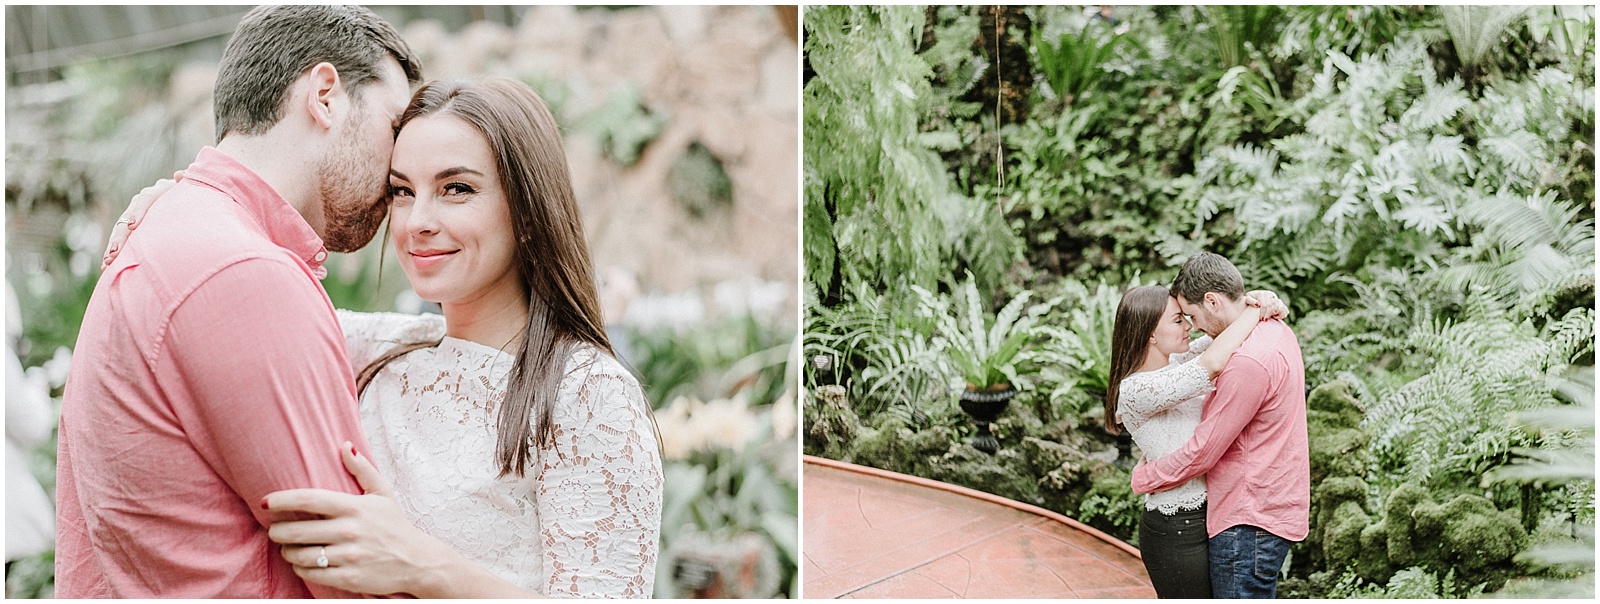 Lincoln Park Conservatory engagement photo session